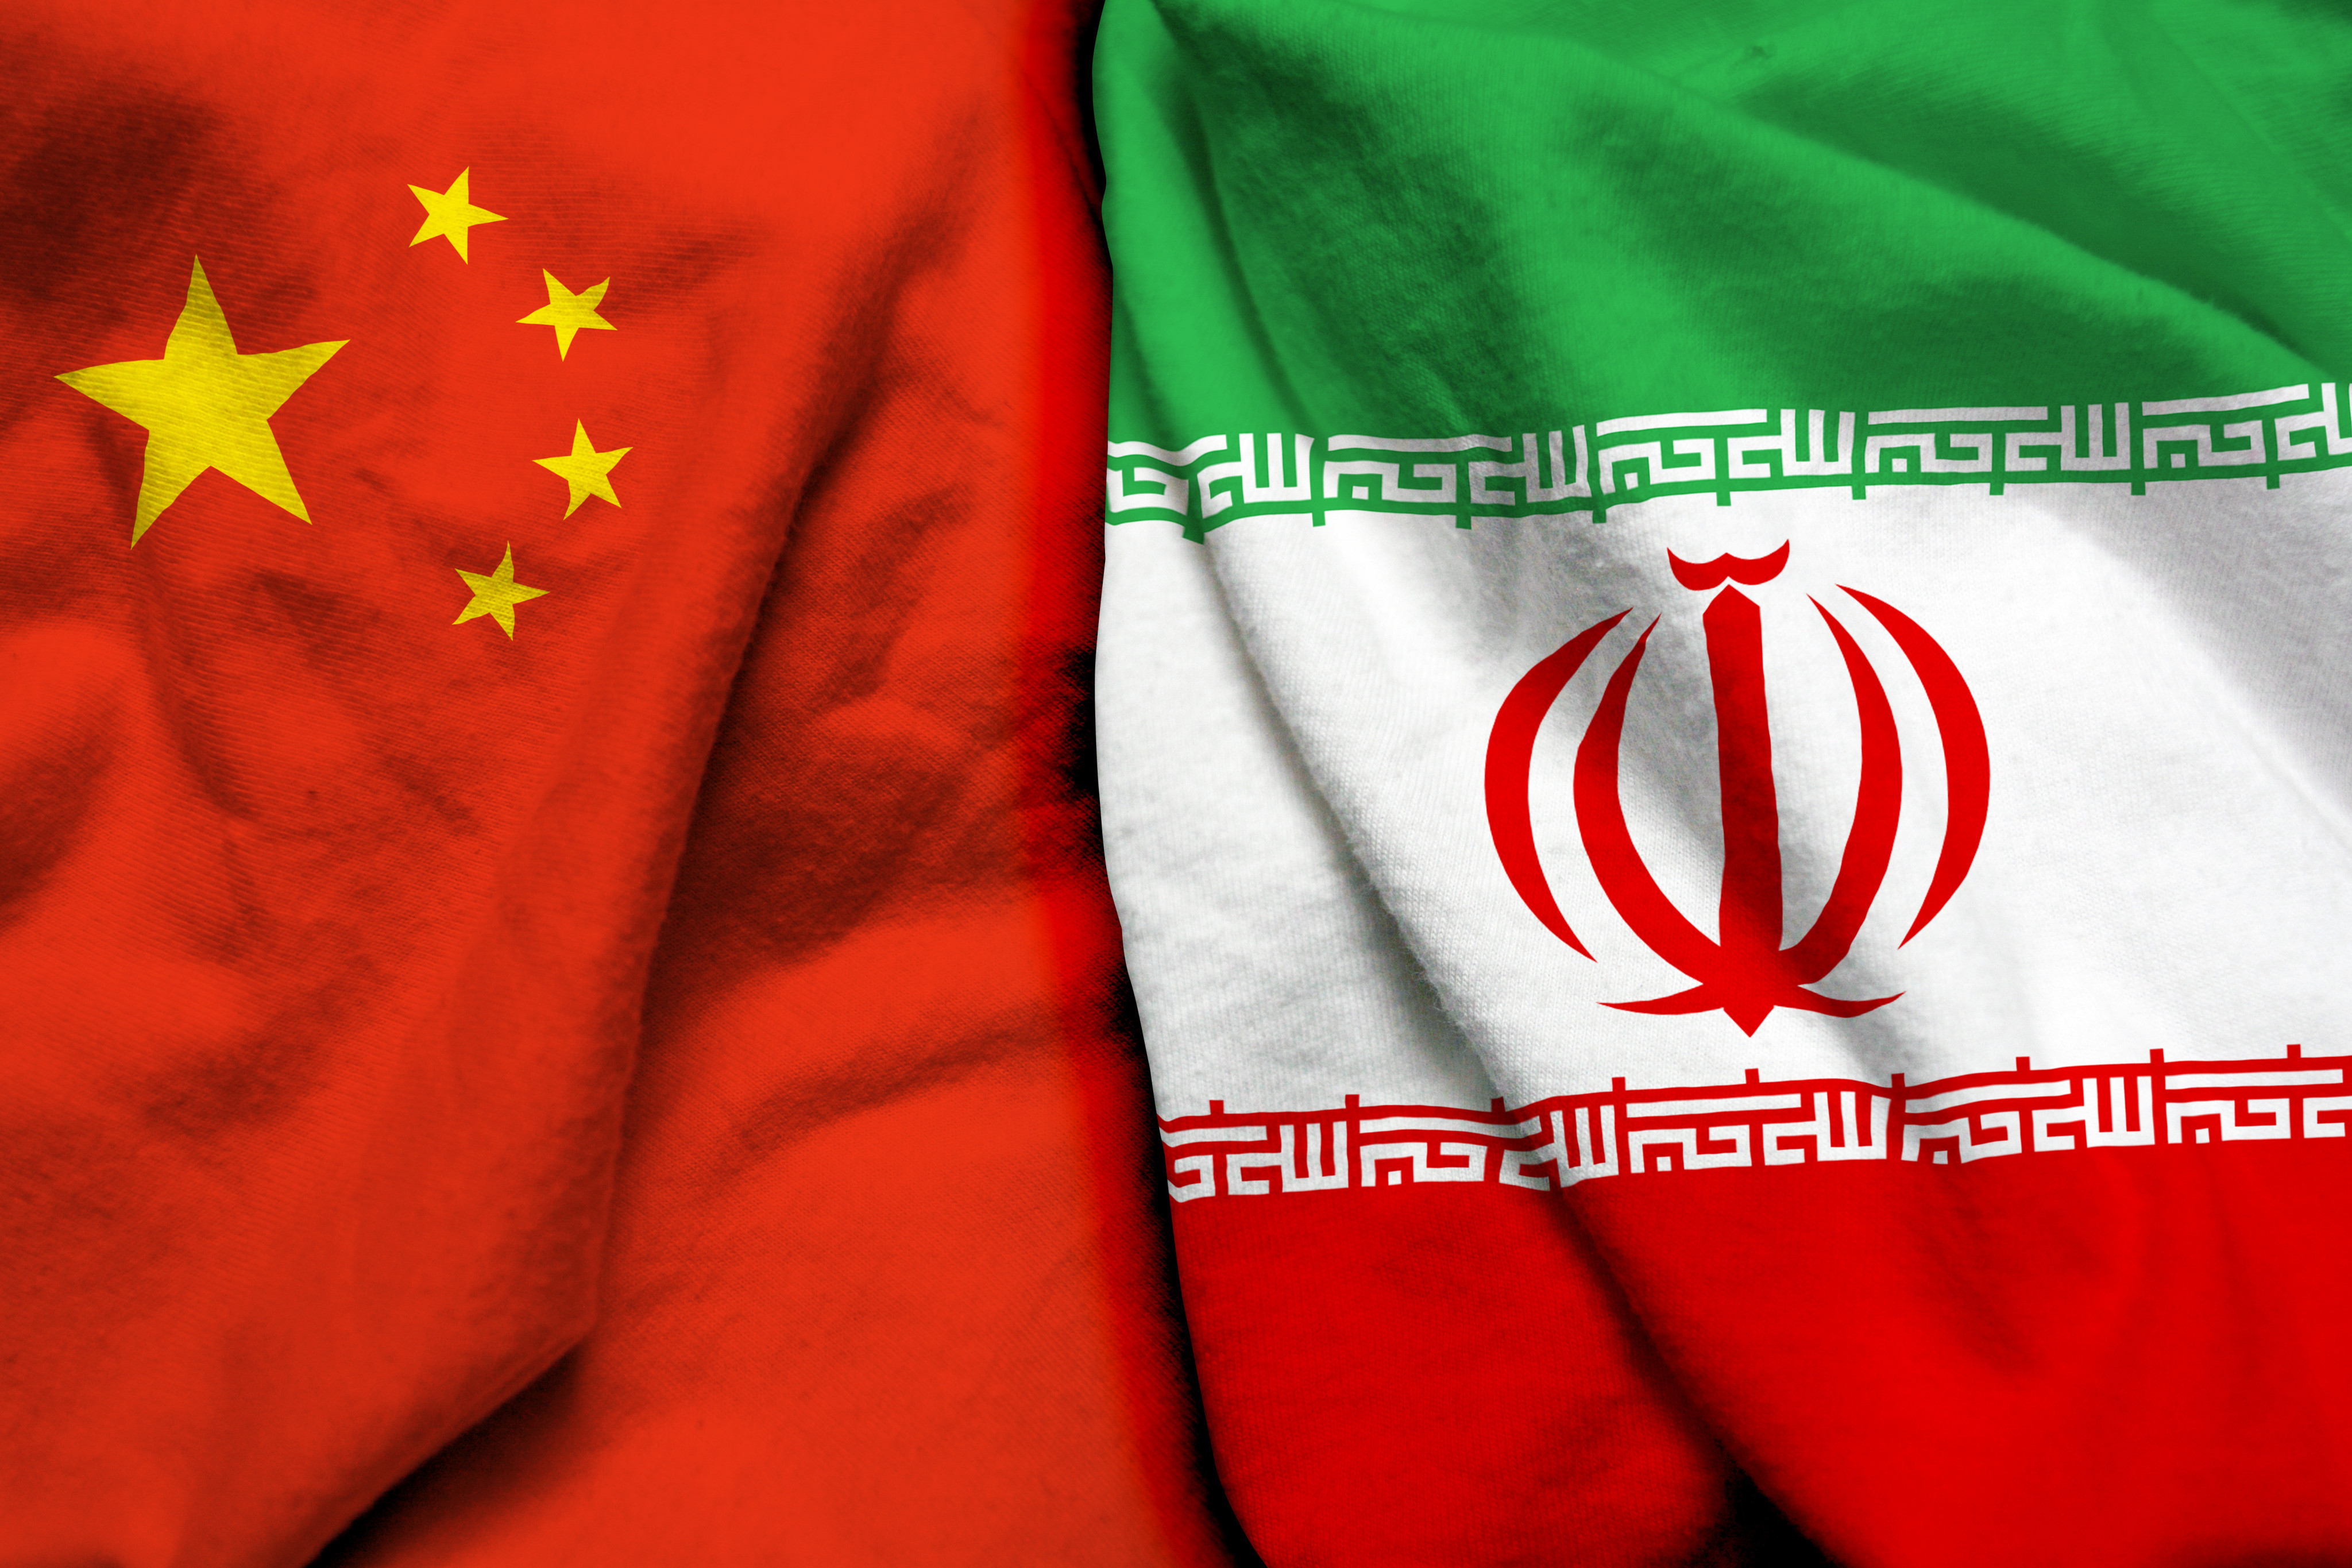 The leaders of China and Iran said on Thursday that their nations would improve bilateral ties and work together on developing multinationalism. Photo: Shutterstock Images 